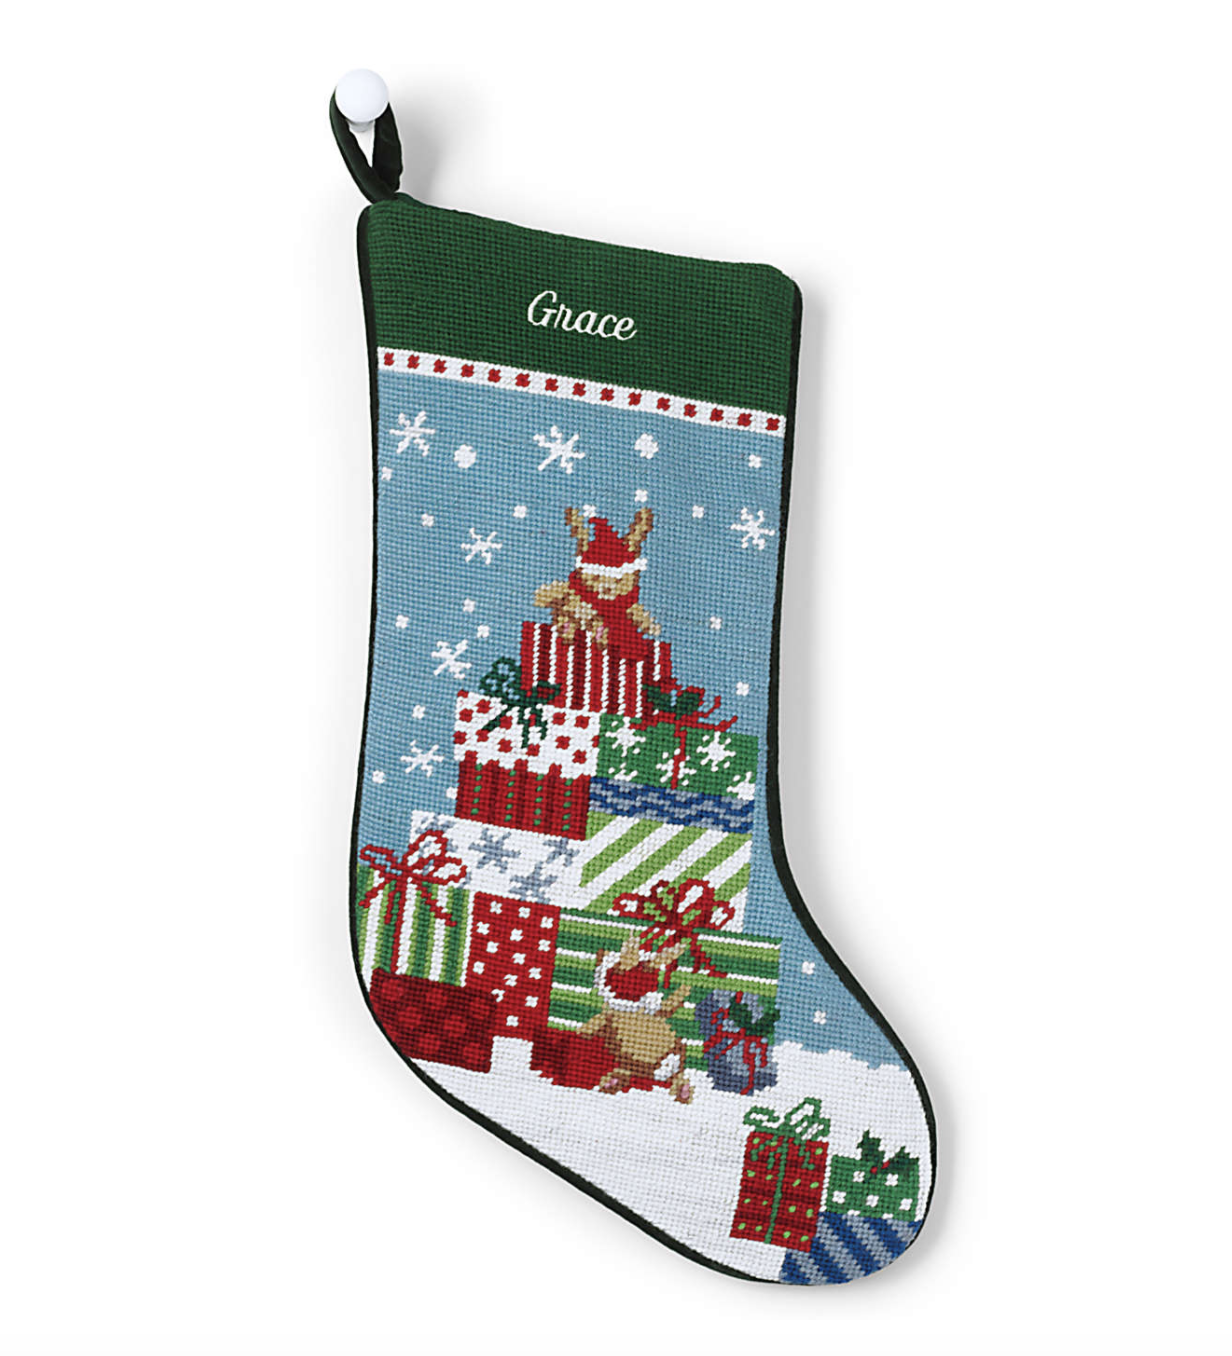 55 Top Images How To Decorate A Christmas Stocking - 45 Best Personalized Christmas Stockings Unique Christmas Stocking Ideas